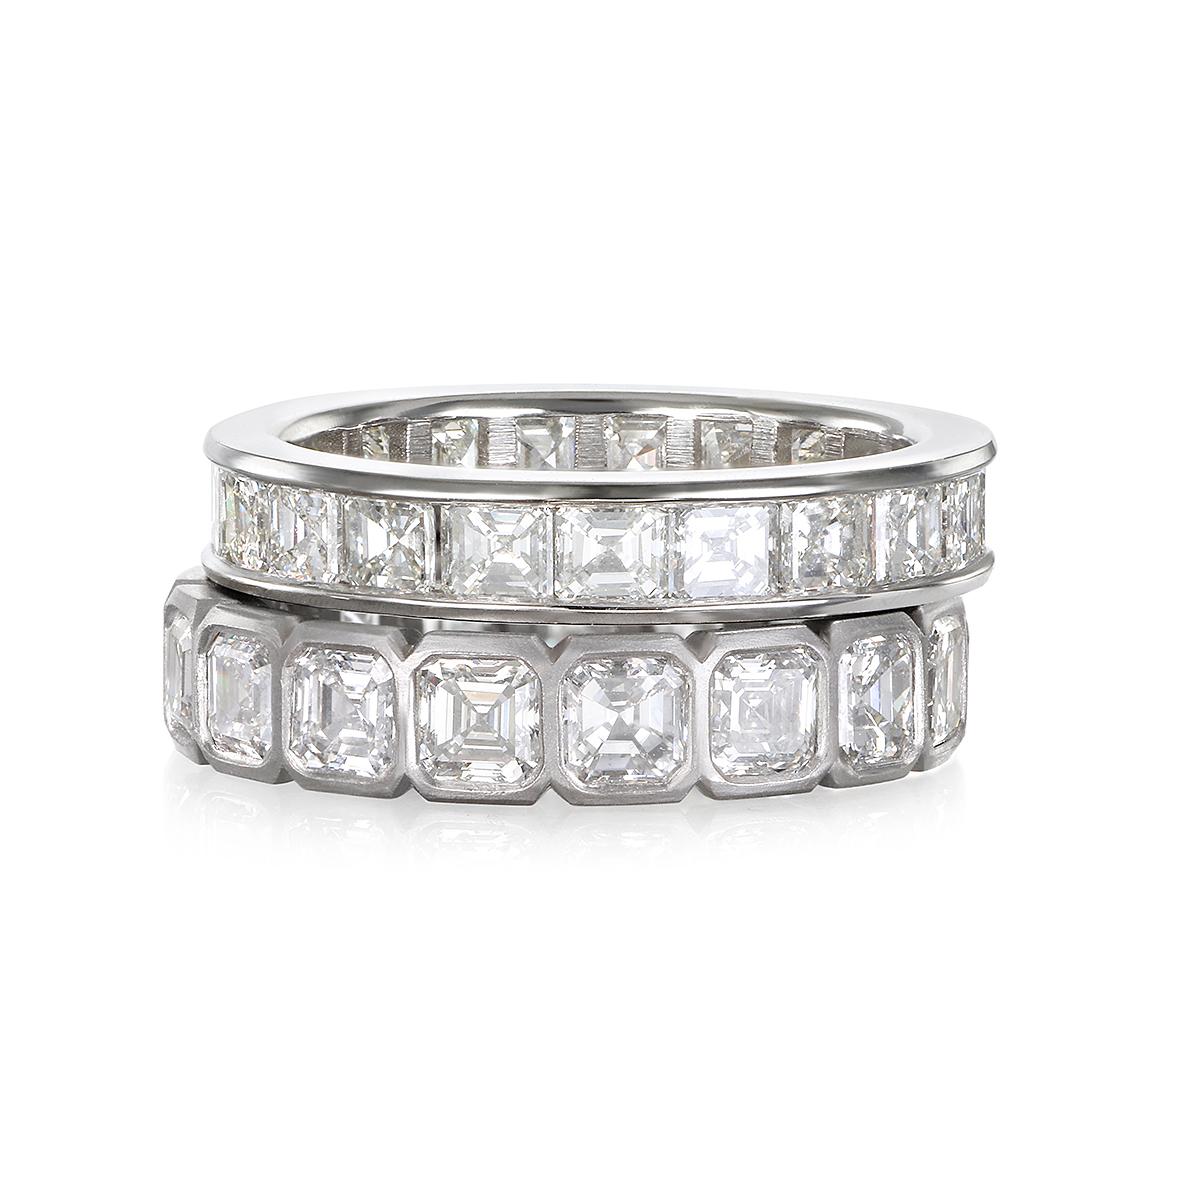 Faye Kim's Platinum Asscher Diamond Eternity Channel Ring is both timeless and modern, with its square cut diamonds that feature large step facets and high crowns, producing a spectacular brilliance. This ring, with its elegant and contemporary